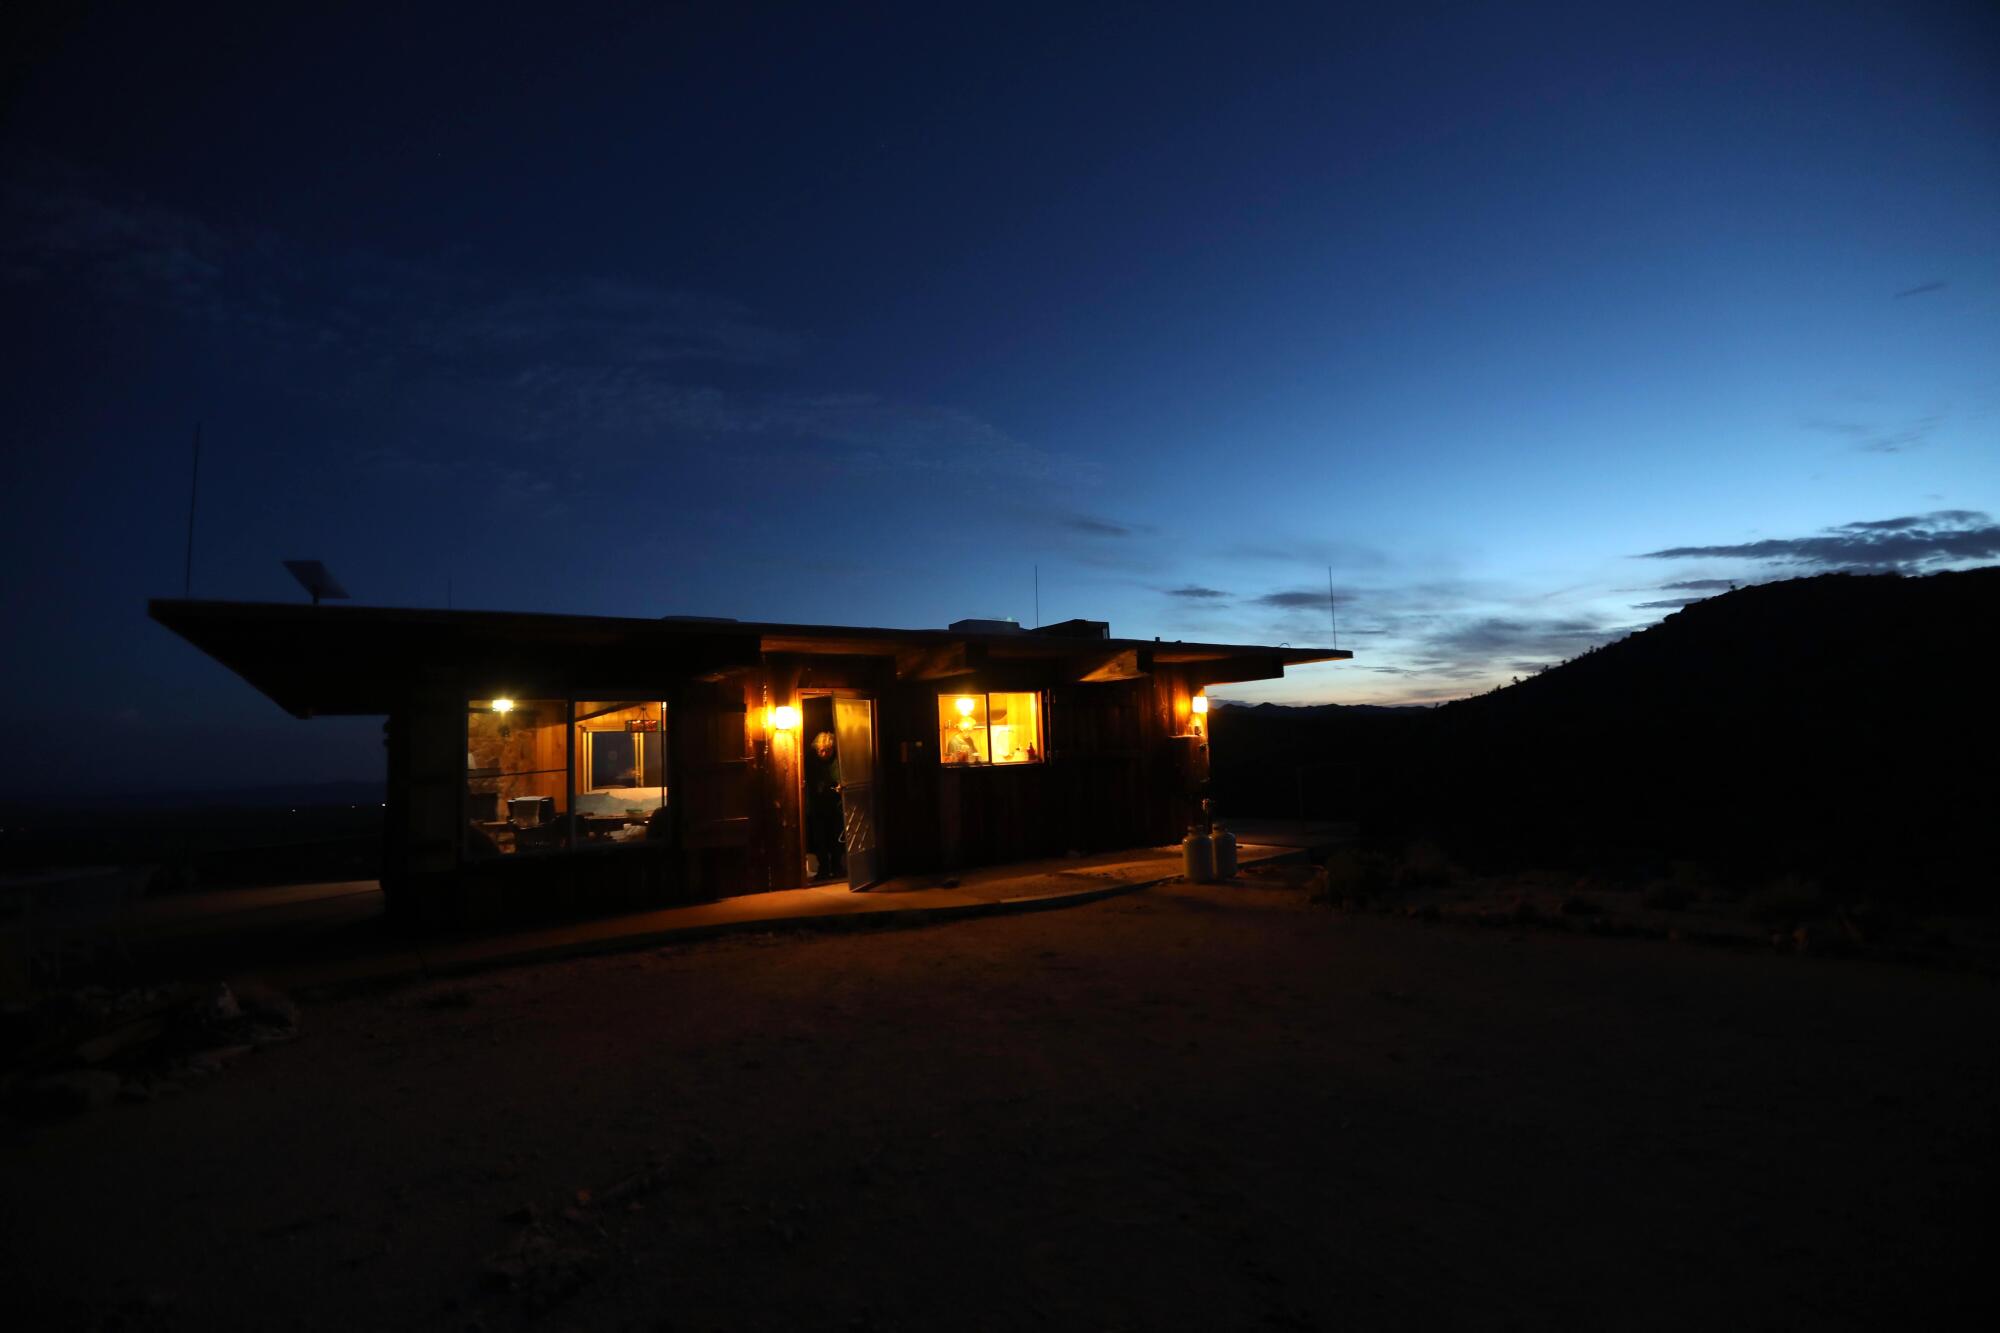 Lights glow in a house as night falls on the desert.